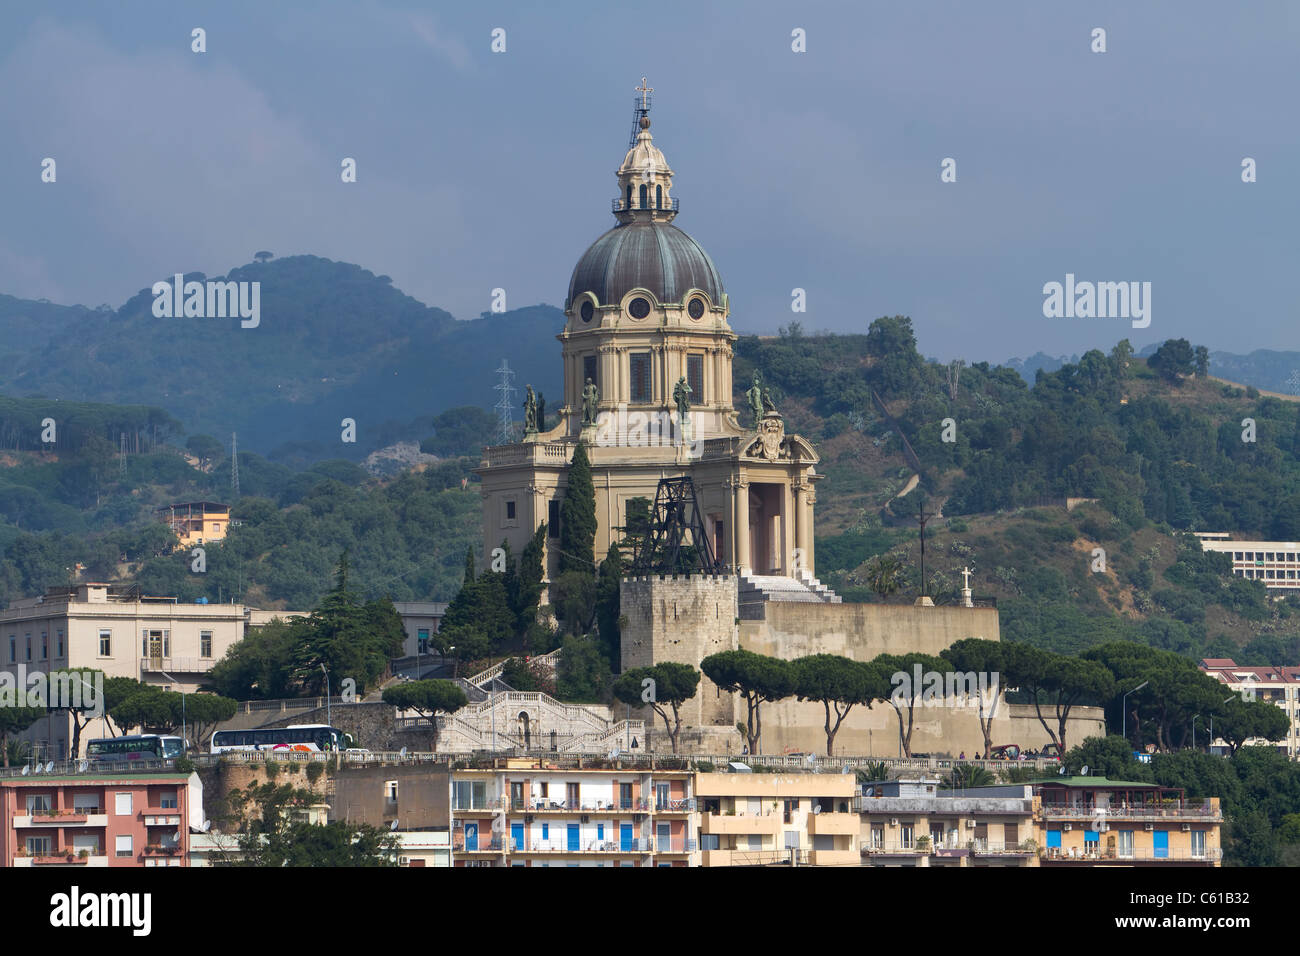 Messina Italy Temple of Christ the King sits high on mountain hill overlooking the city and Mediterranean Sea. Stock Photo